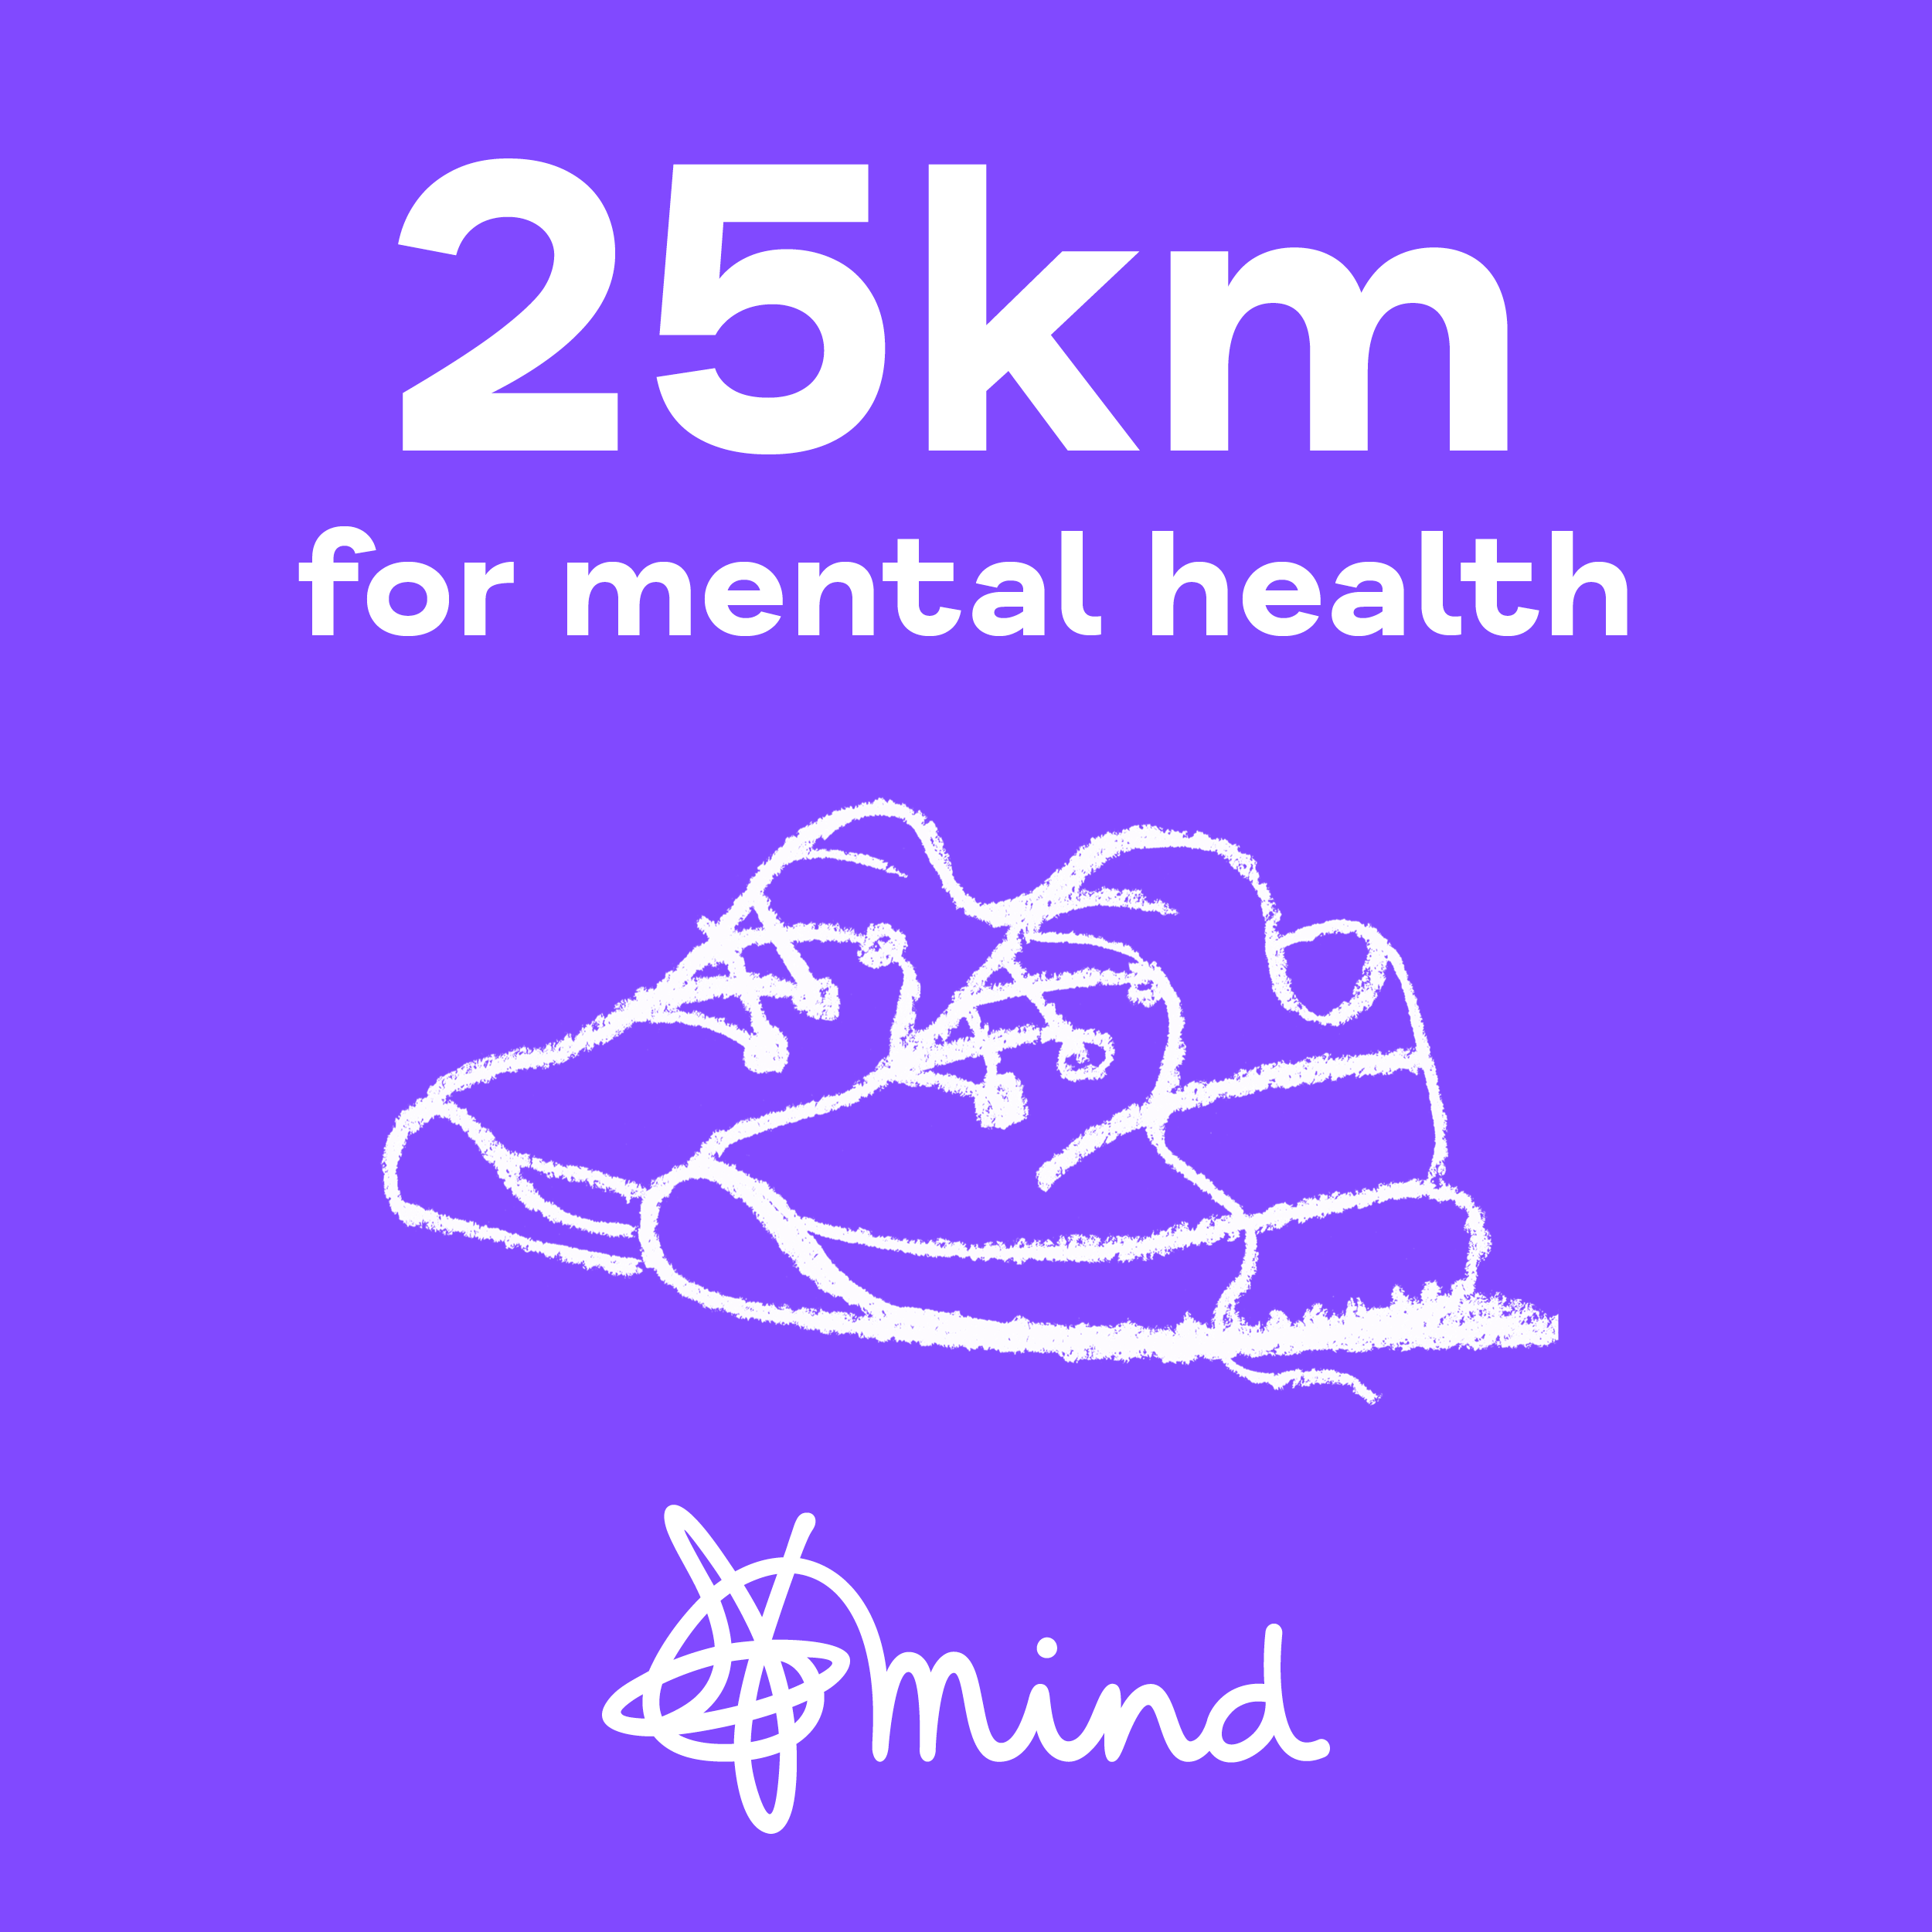 The words '25km for mental health' with an illustration of a pair of trainers and the Mind logo